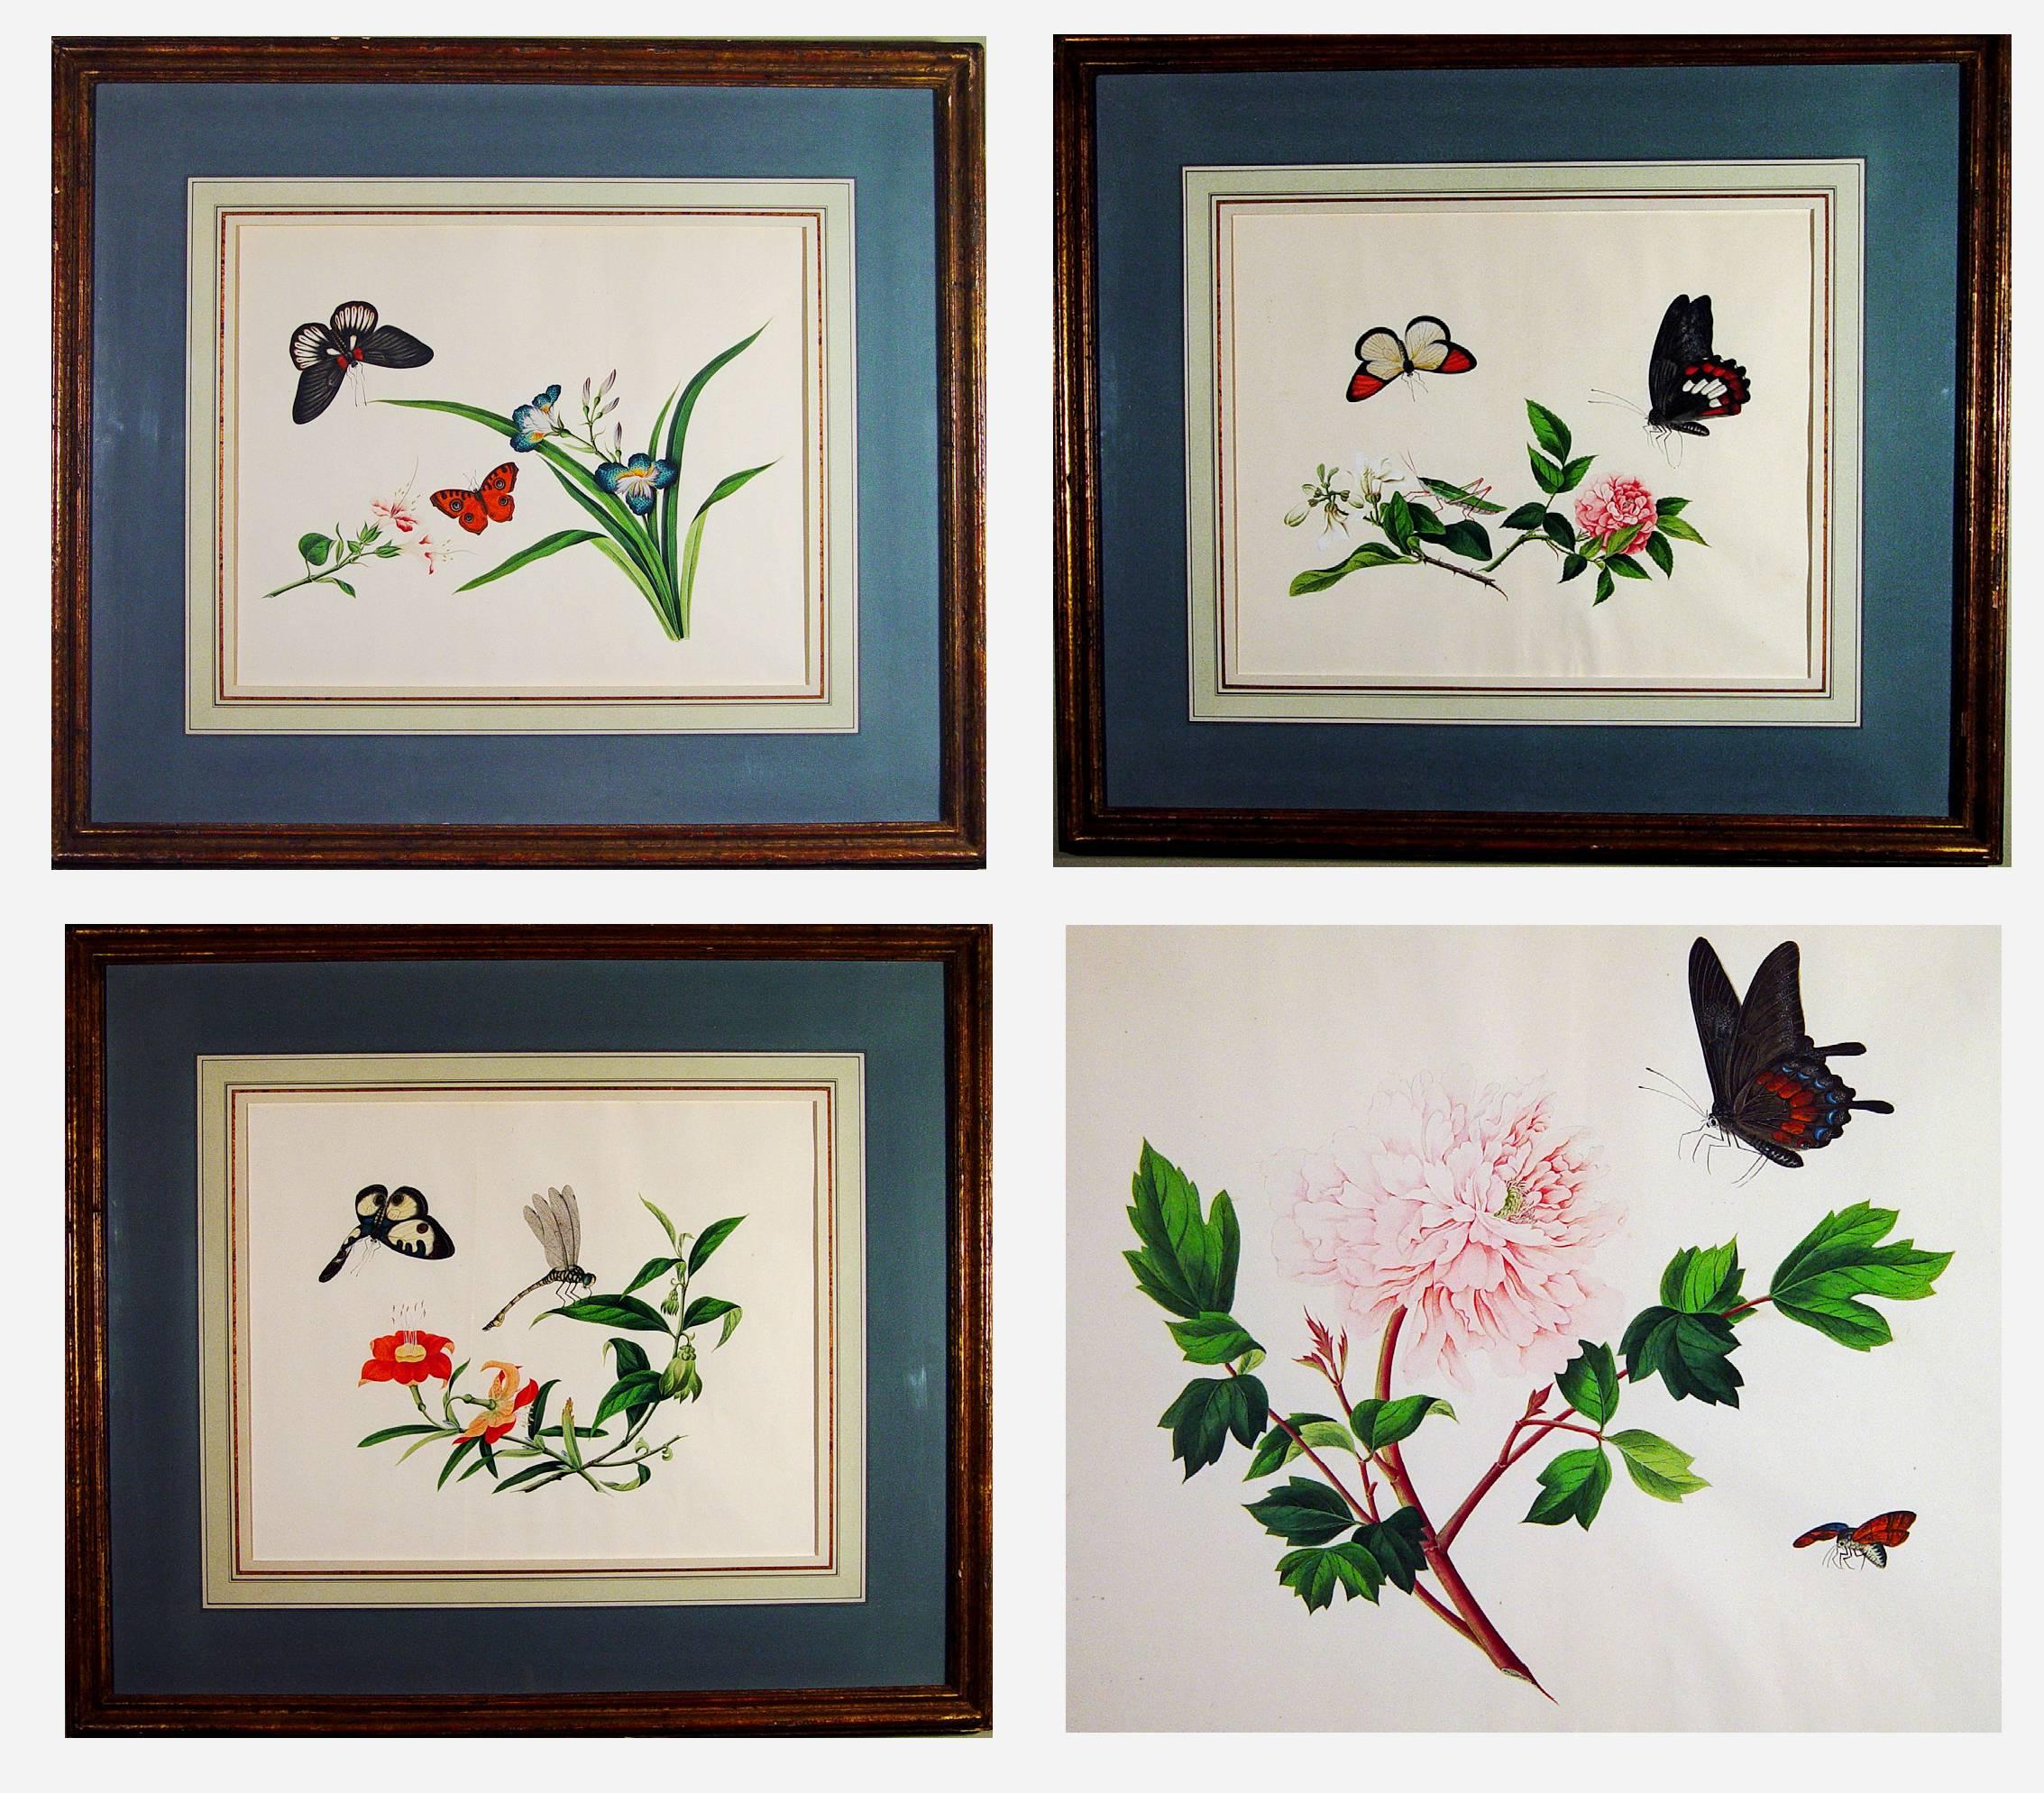 China Trade Botanical large watercolors on paper,
Set of Four
Early 19th Century.

The larger than usual Chinese watercolors depict various butterflies and insects such as a dragonfly and cricket amongst flowers on paper within a layered mat and